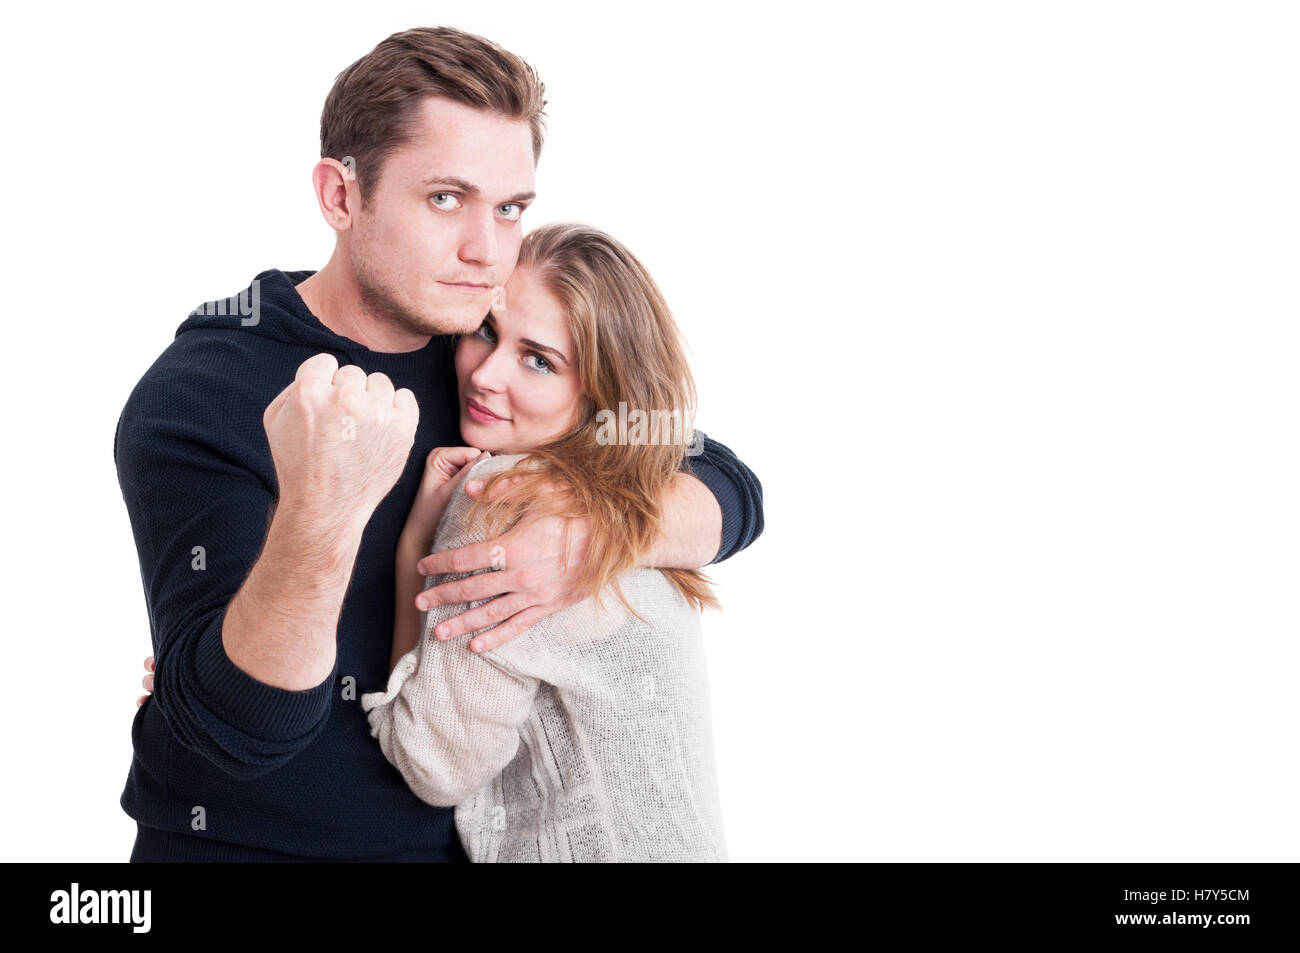 Man defending his woman showing fist like having a fight isolated on white background with copy text space Stock Photo